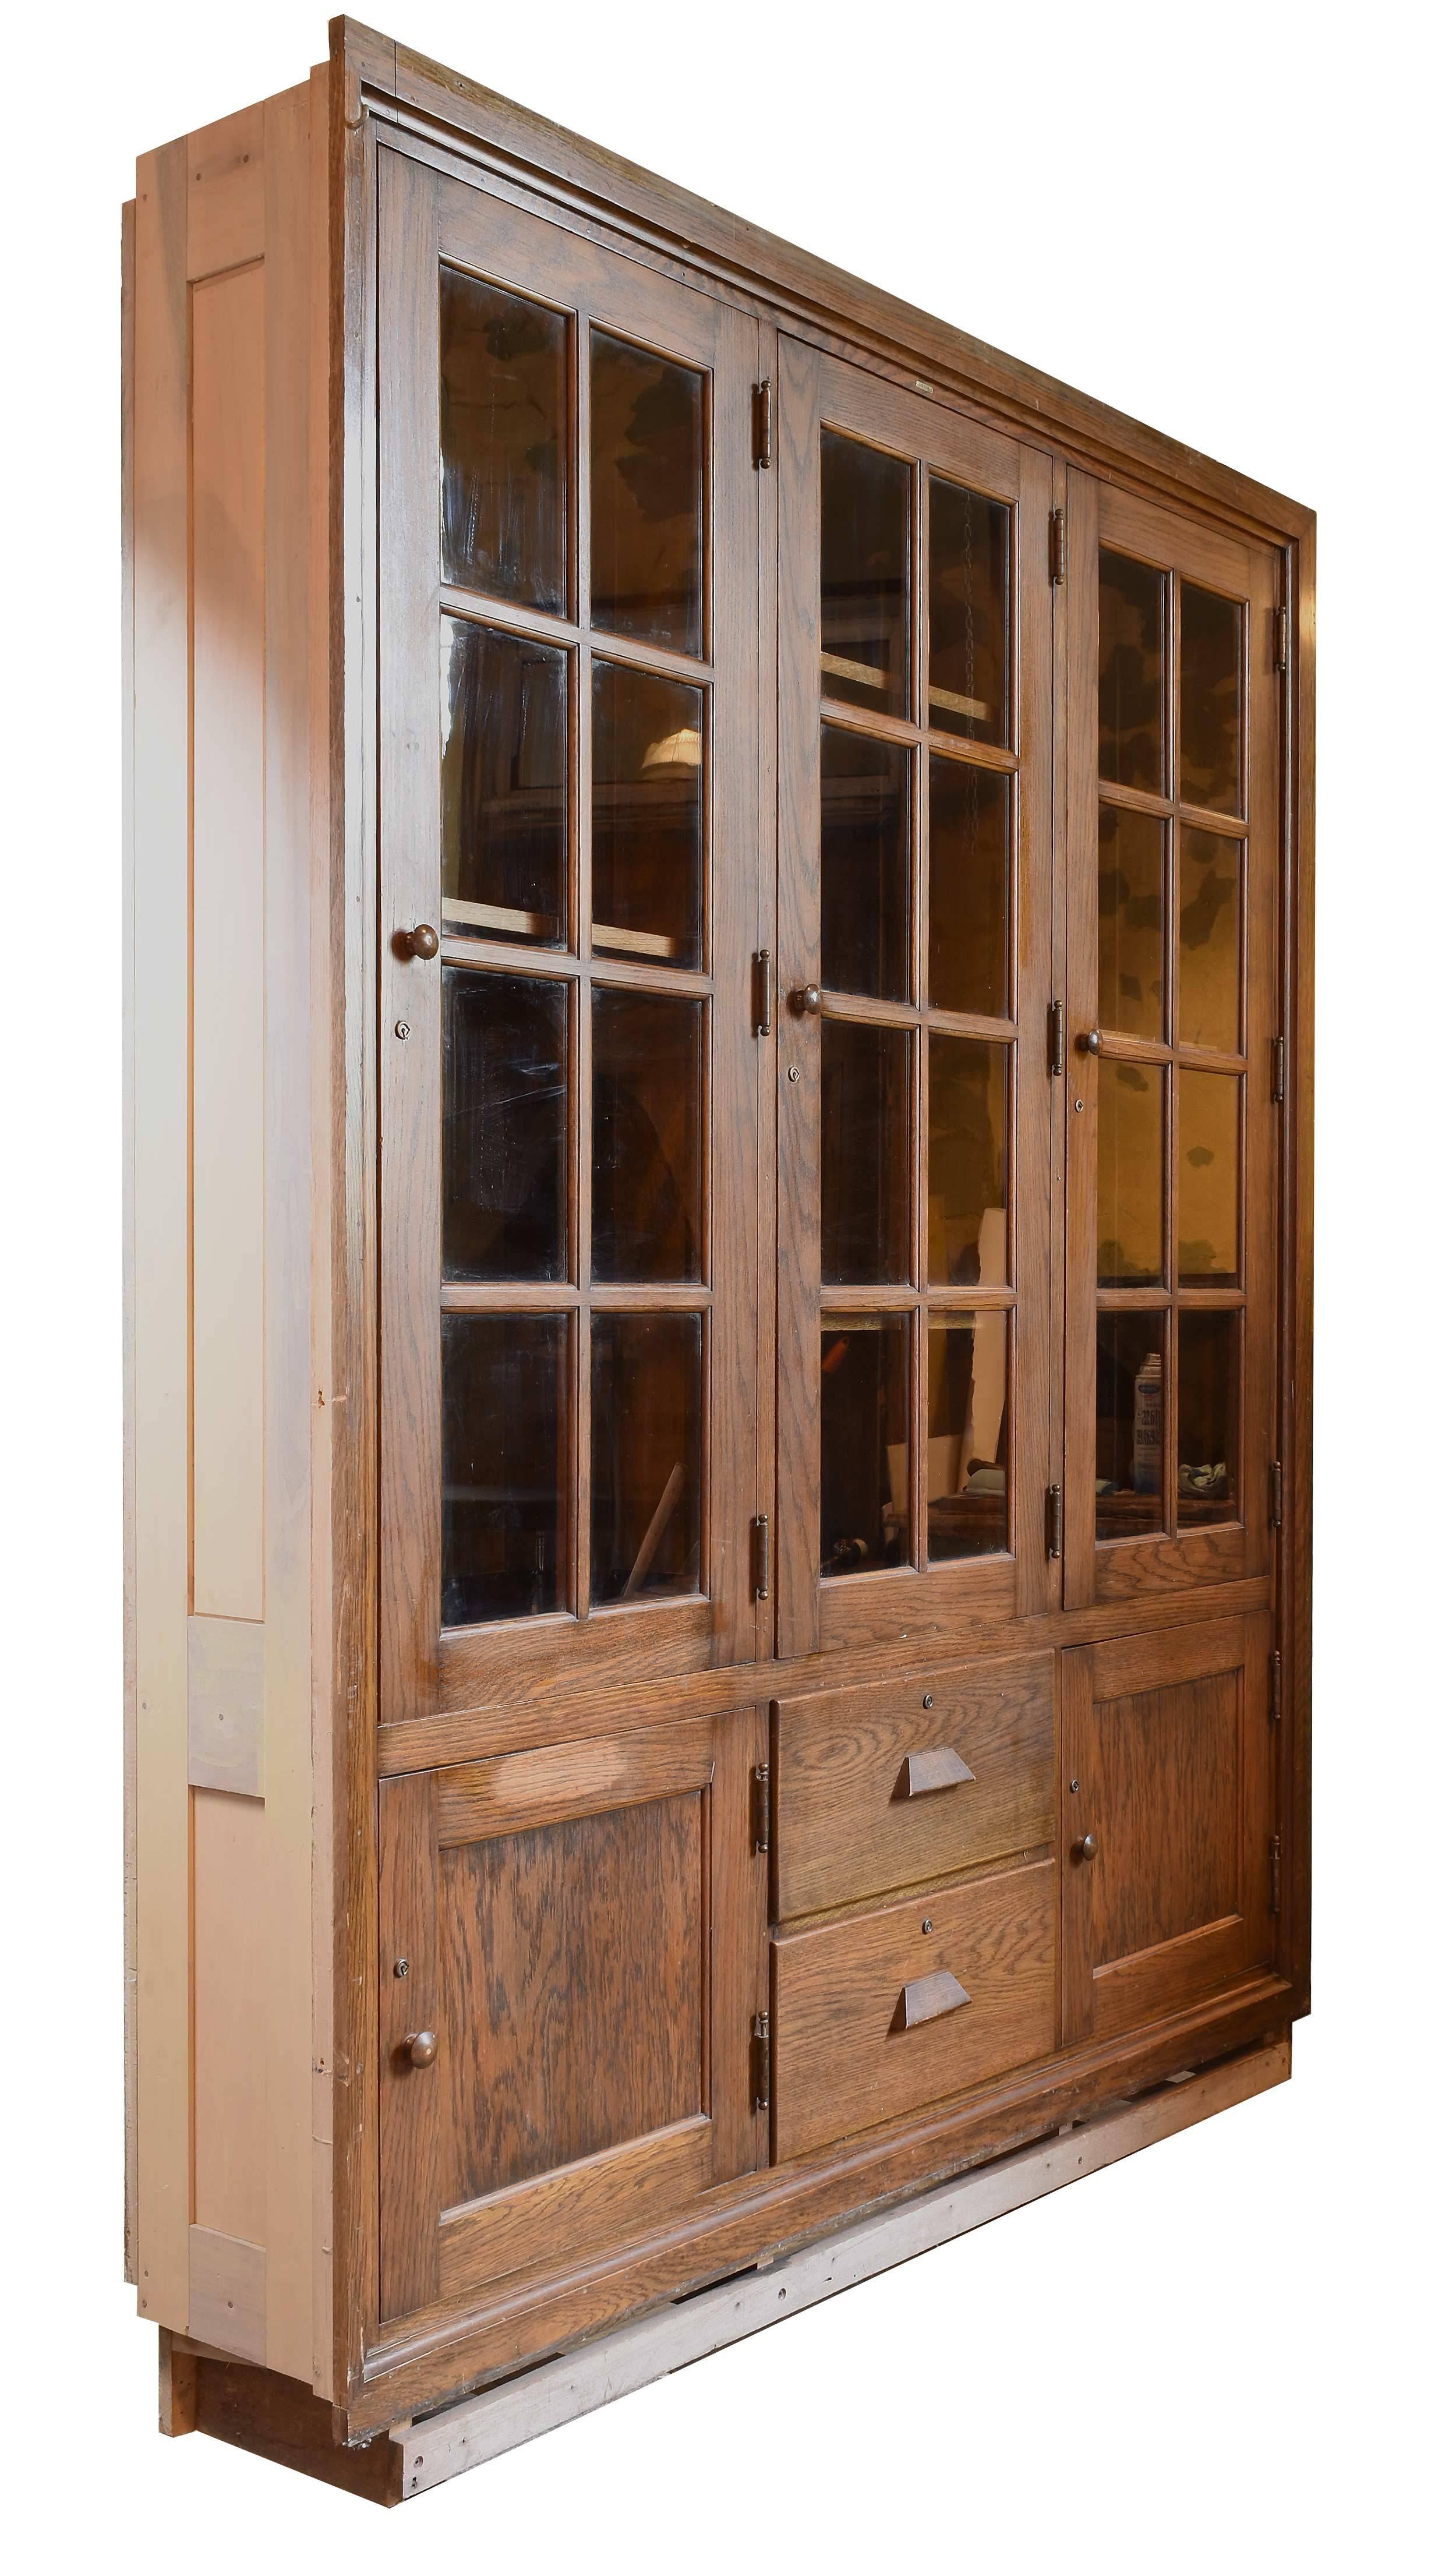 This built-in stained fumed oak school room cabinets are a great example of early American craftsmanship. There is plenty of storage space with three (19.75